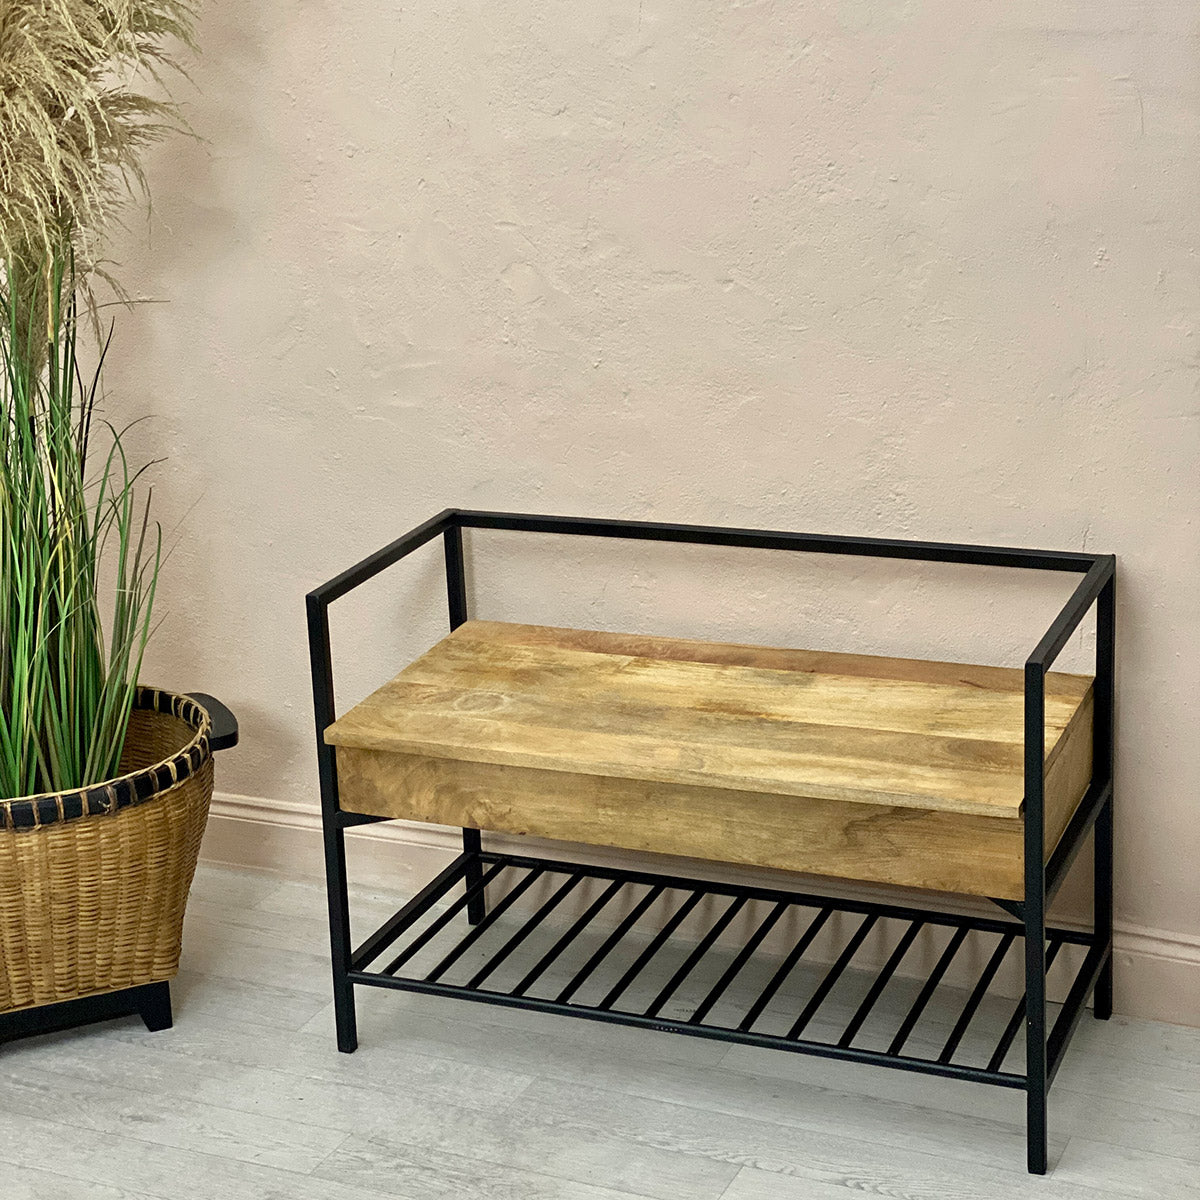 Cohen Industrial Storage Bench - Black Metal & Wood - Small - Mrs Robinson